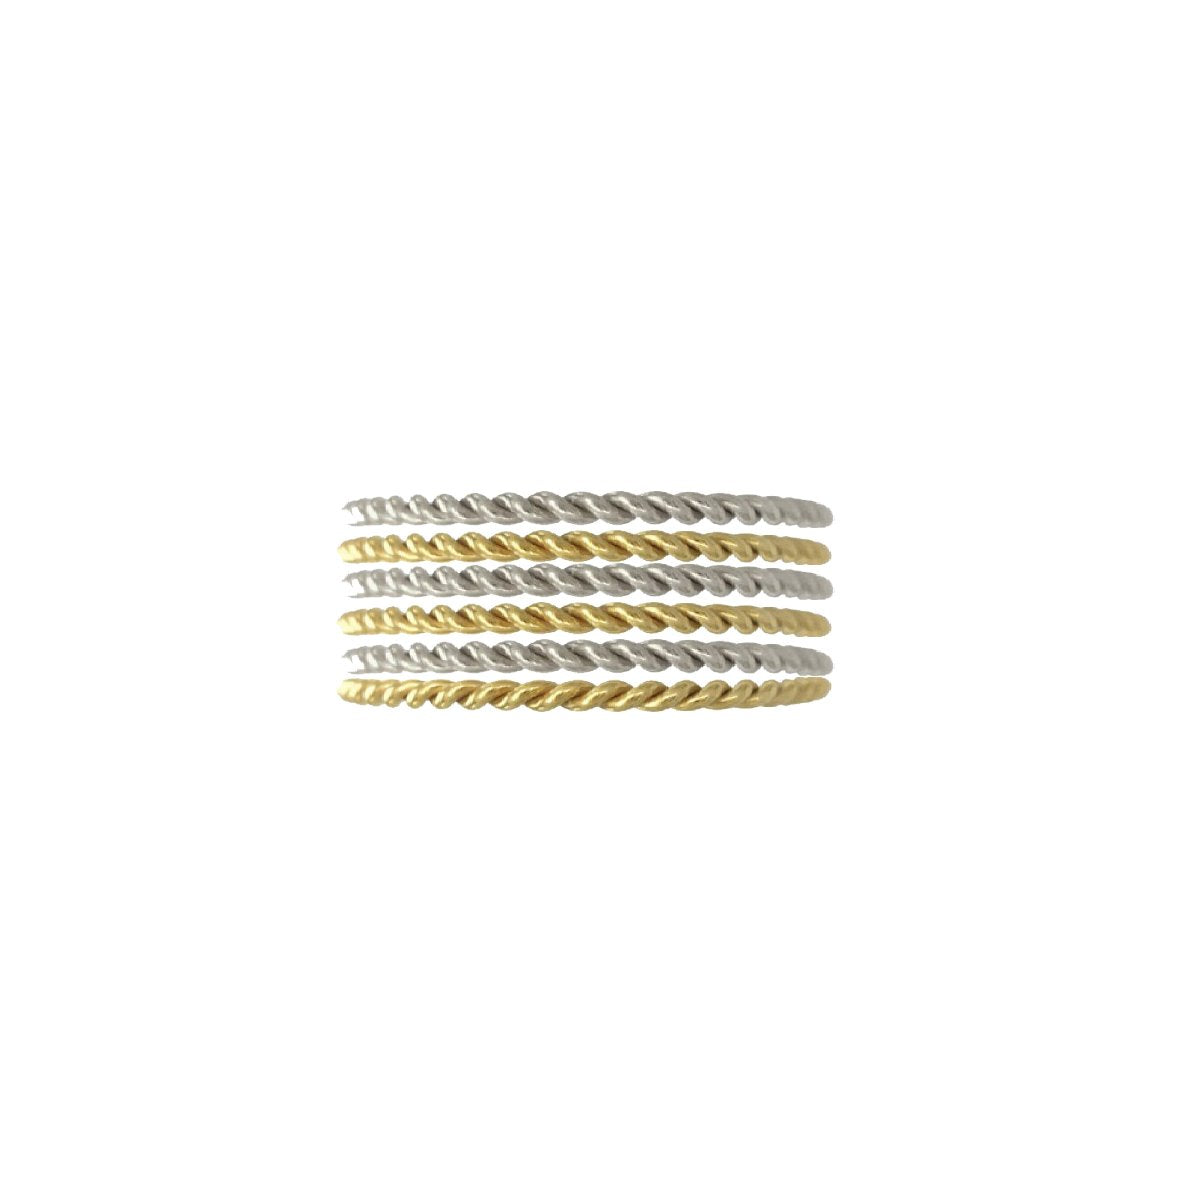 Rope 6 Ring Stack - Mixed Metal Robyn Canady 5 